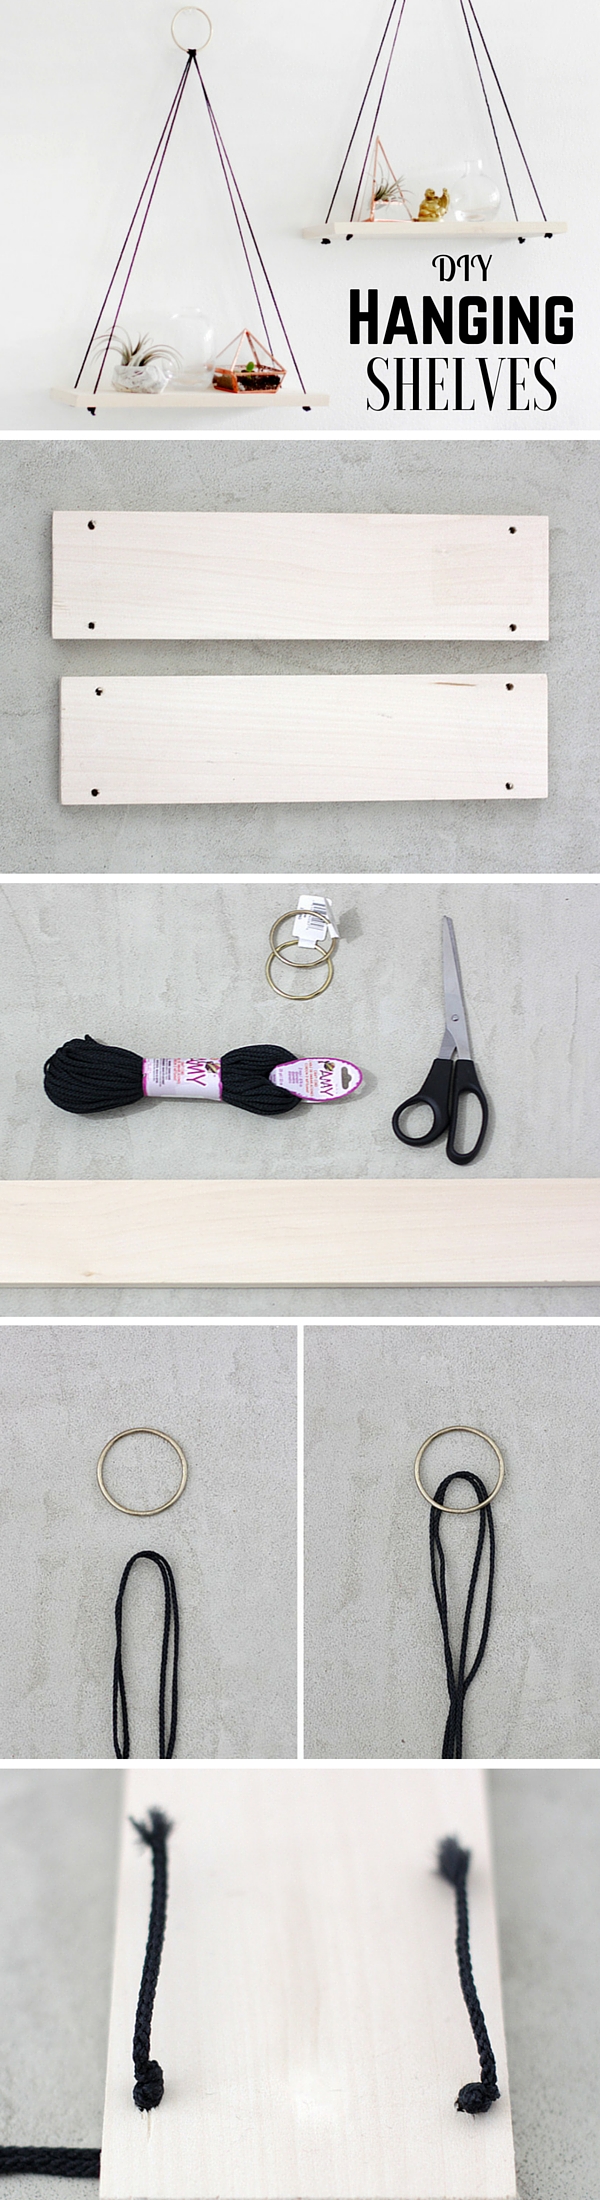 Check out the tutorial: #DIY Hanging Shelves @istandarddesign